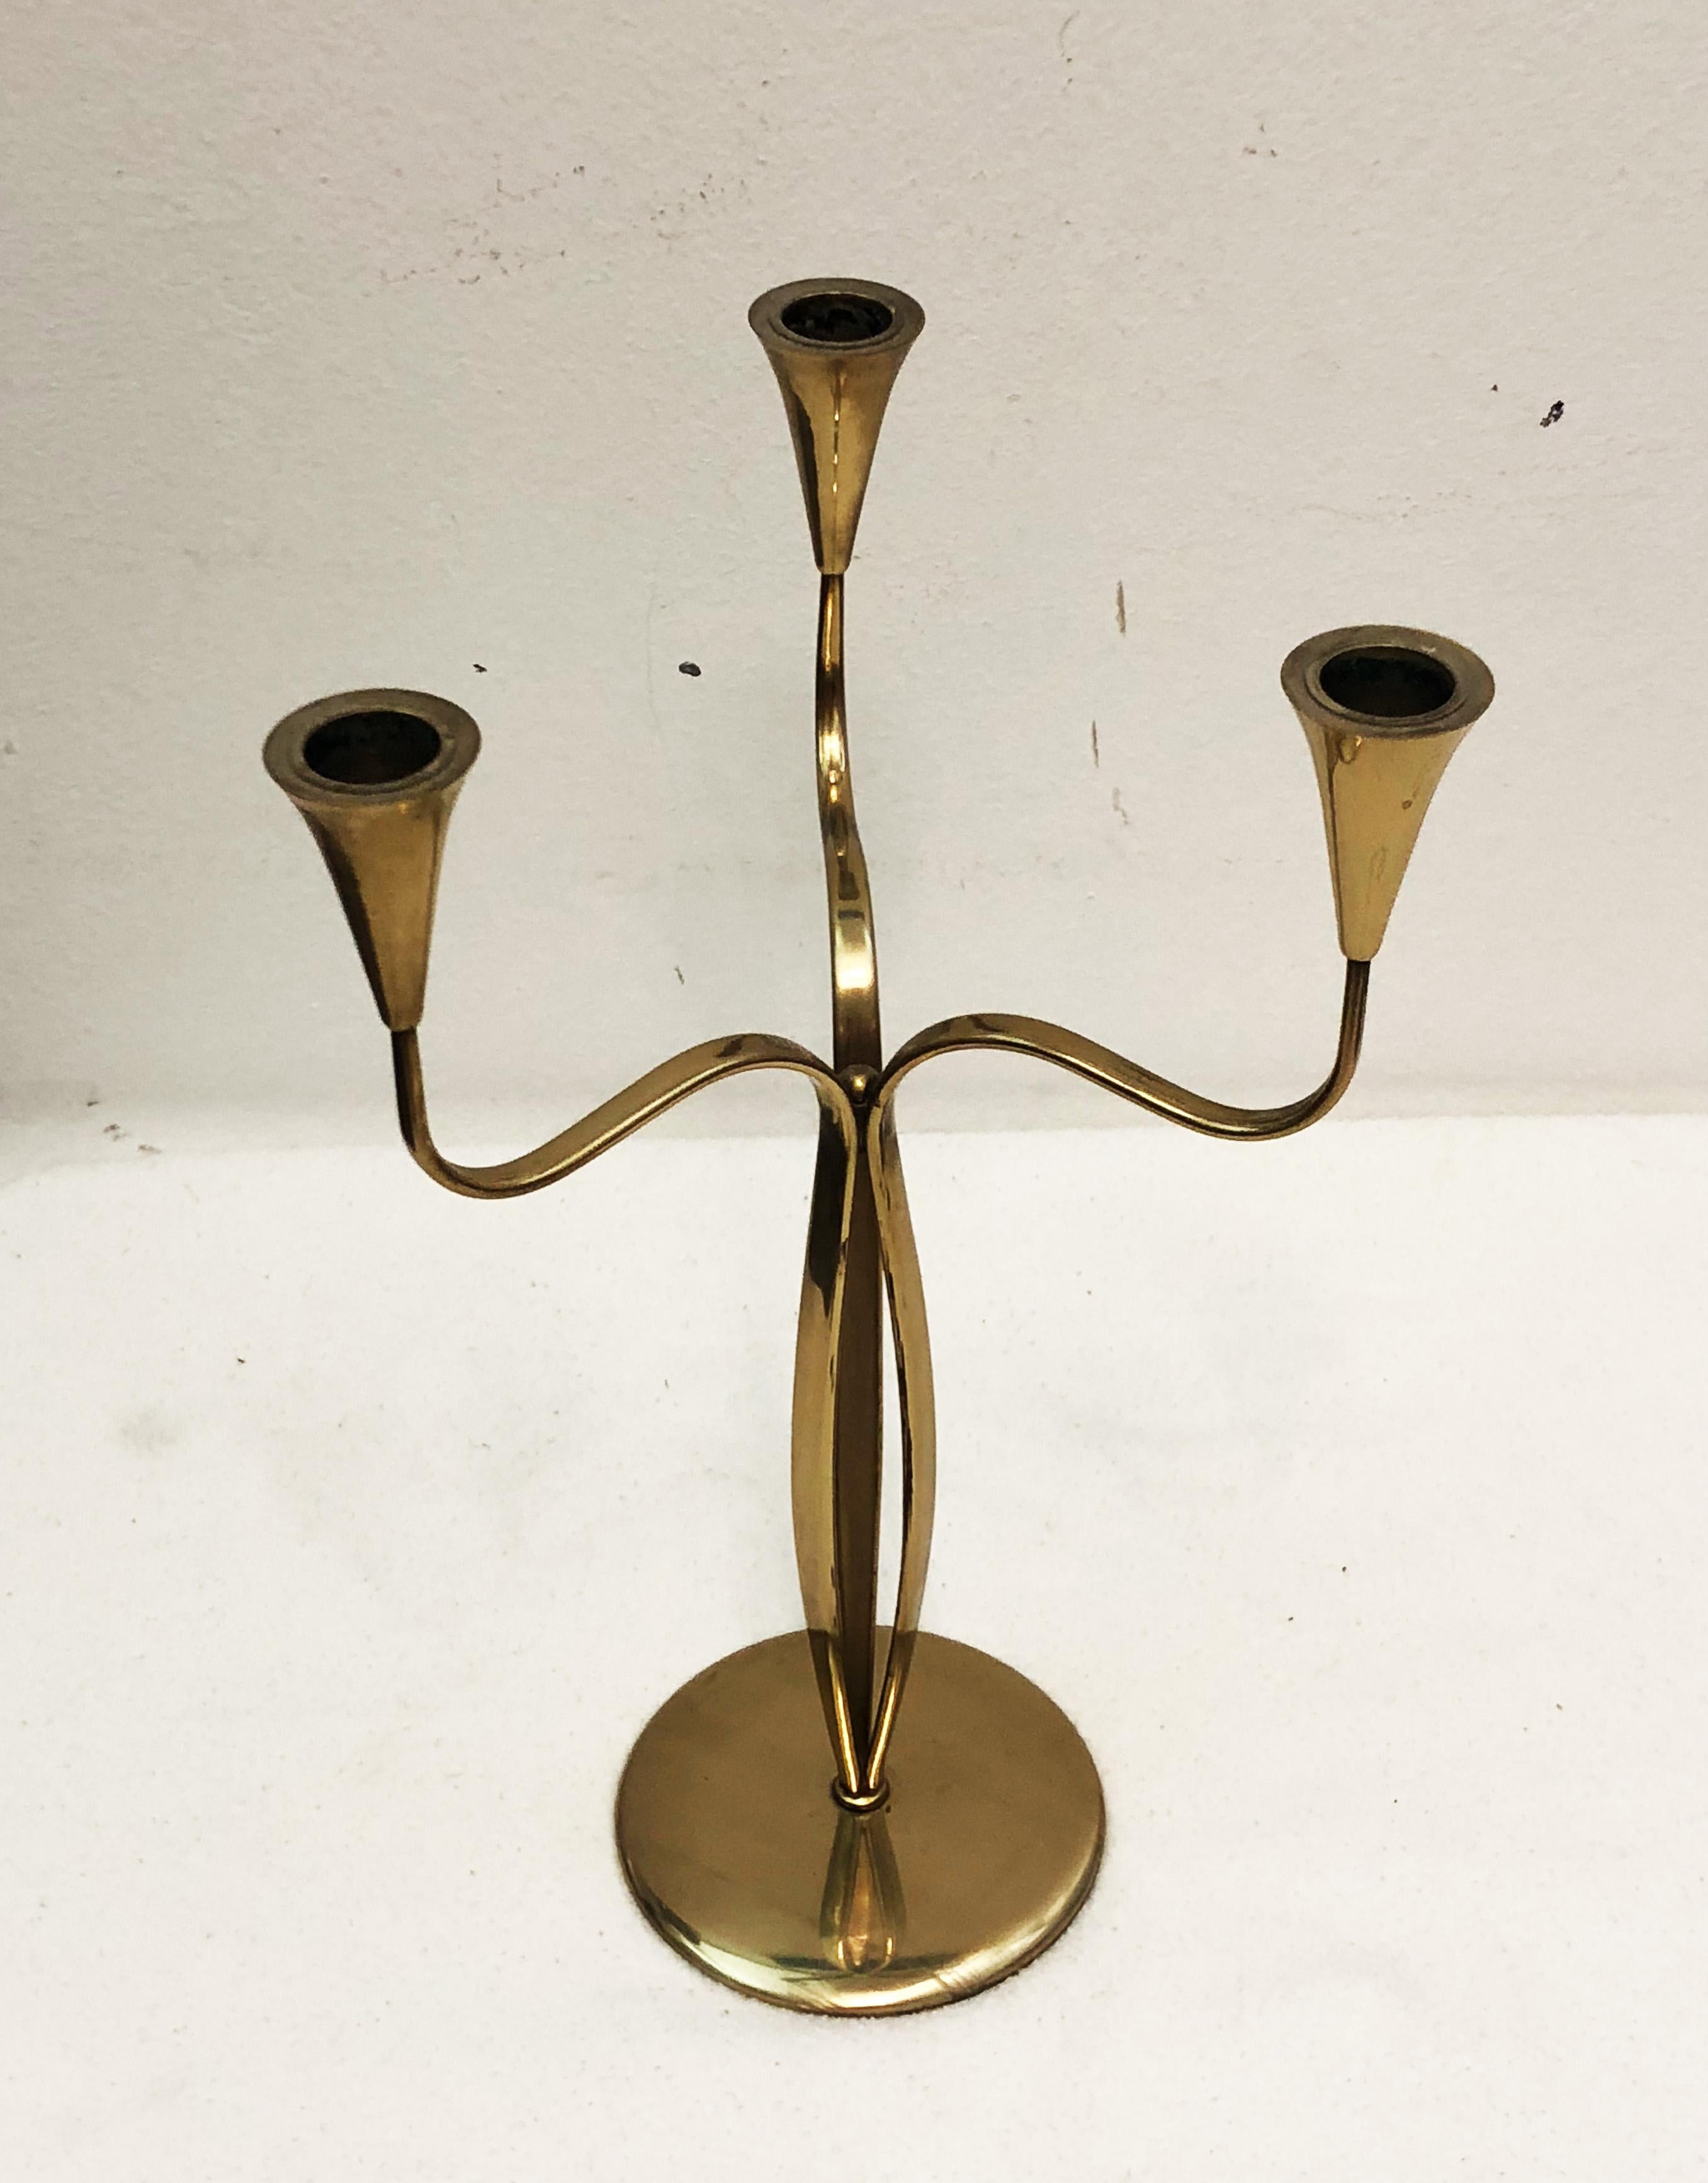 Brass candlestick, made in Denmark in the 1960s
Measures: Height 32cm, diameter 22cm.
Used but in very good condition.